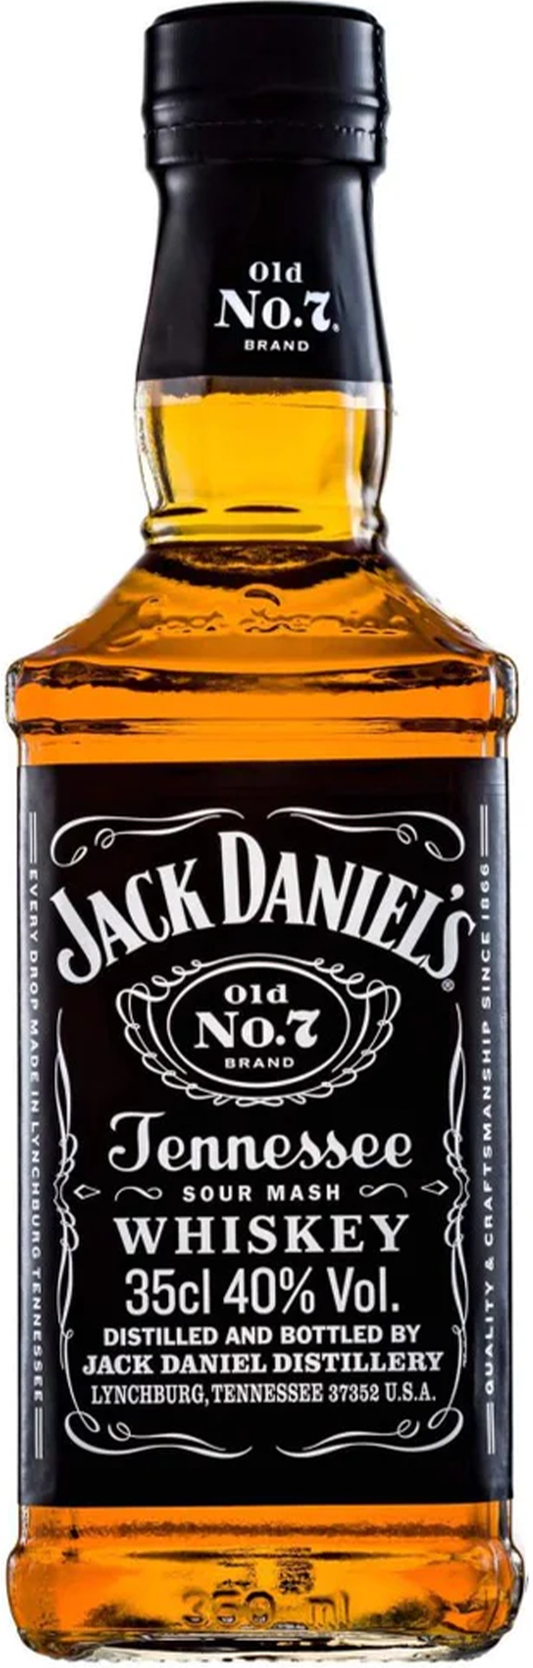 Jack Daniels Old No.7 Tennessee Whiskey 350ml